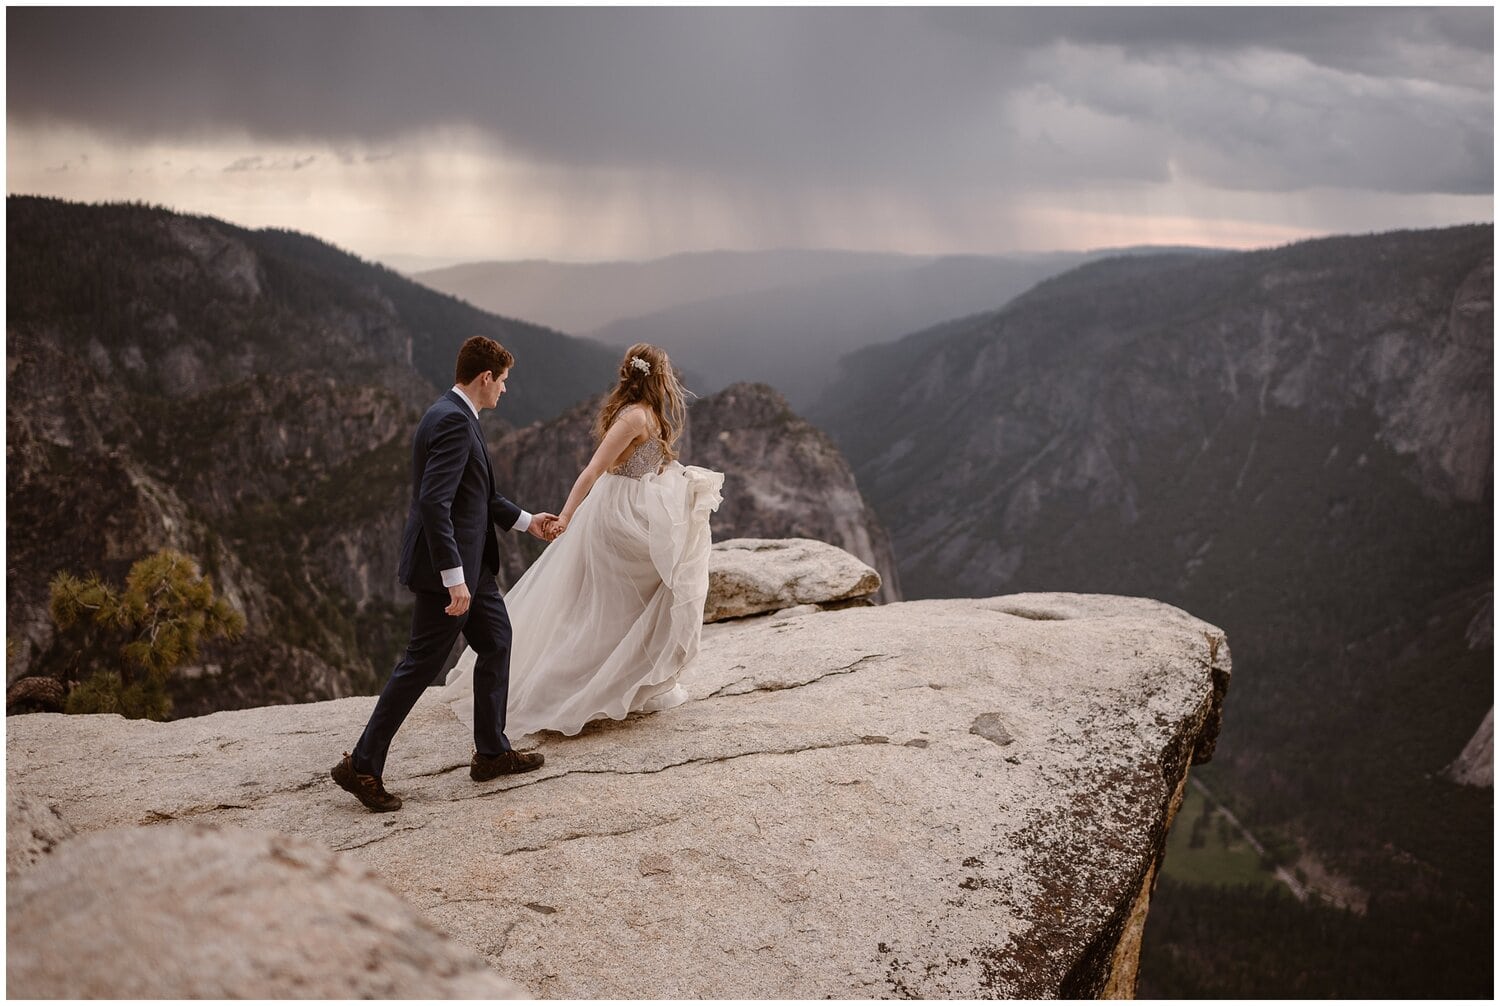 Bride and groom walk on cliff together that overlooks mountain landscape. 